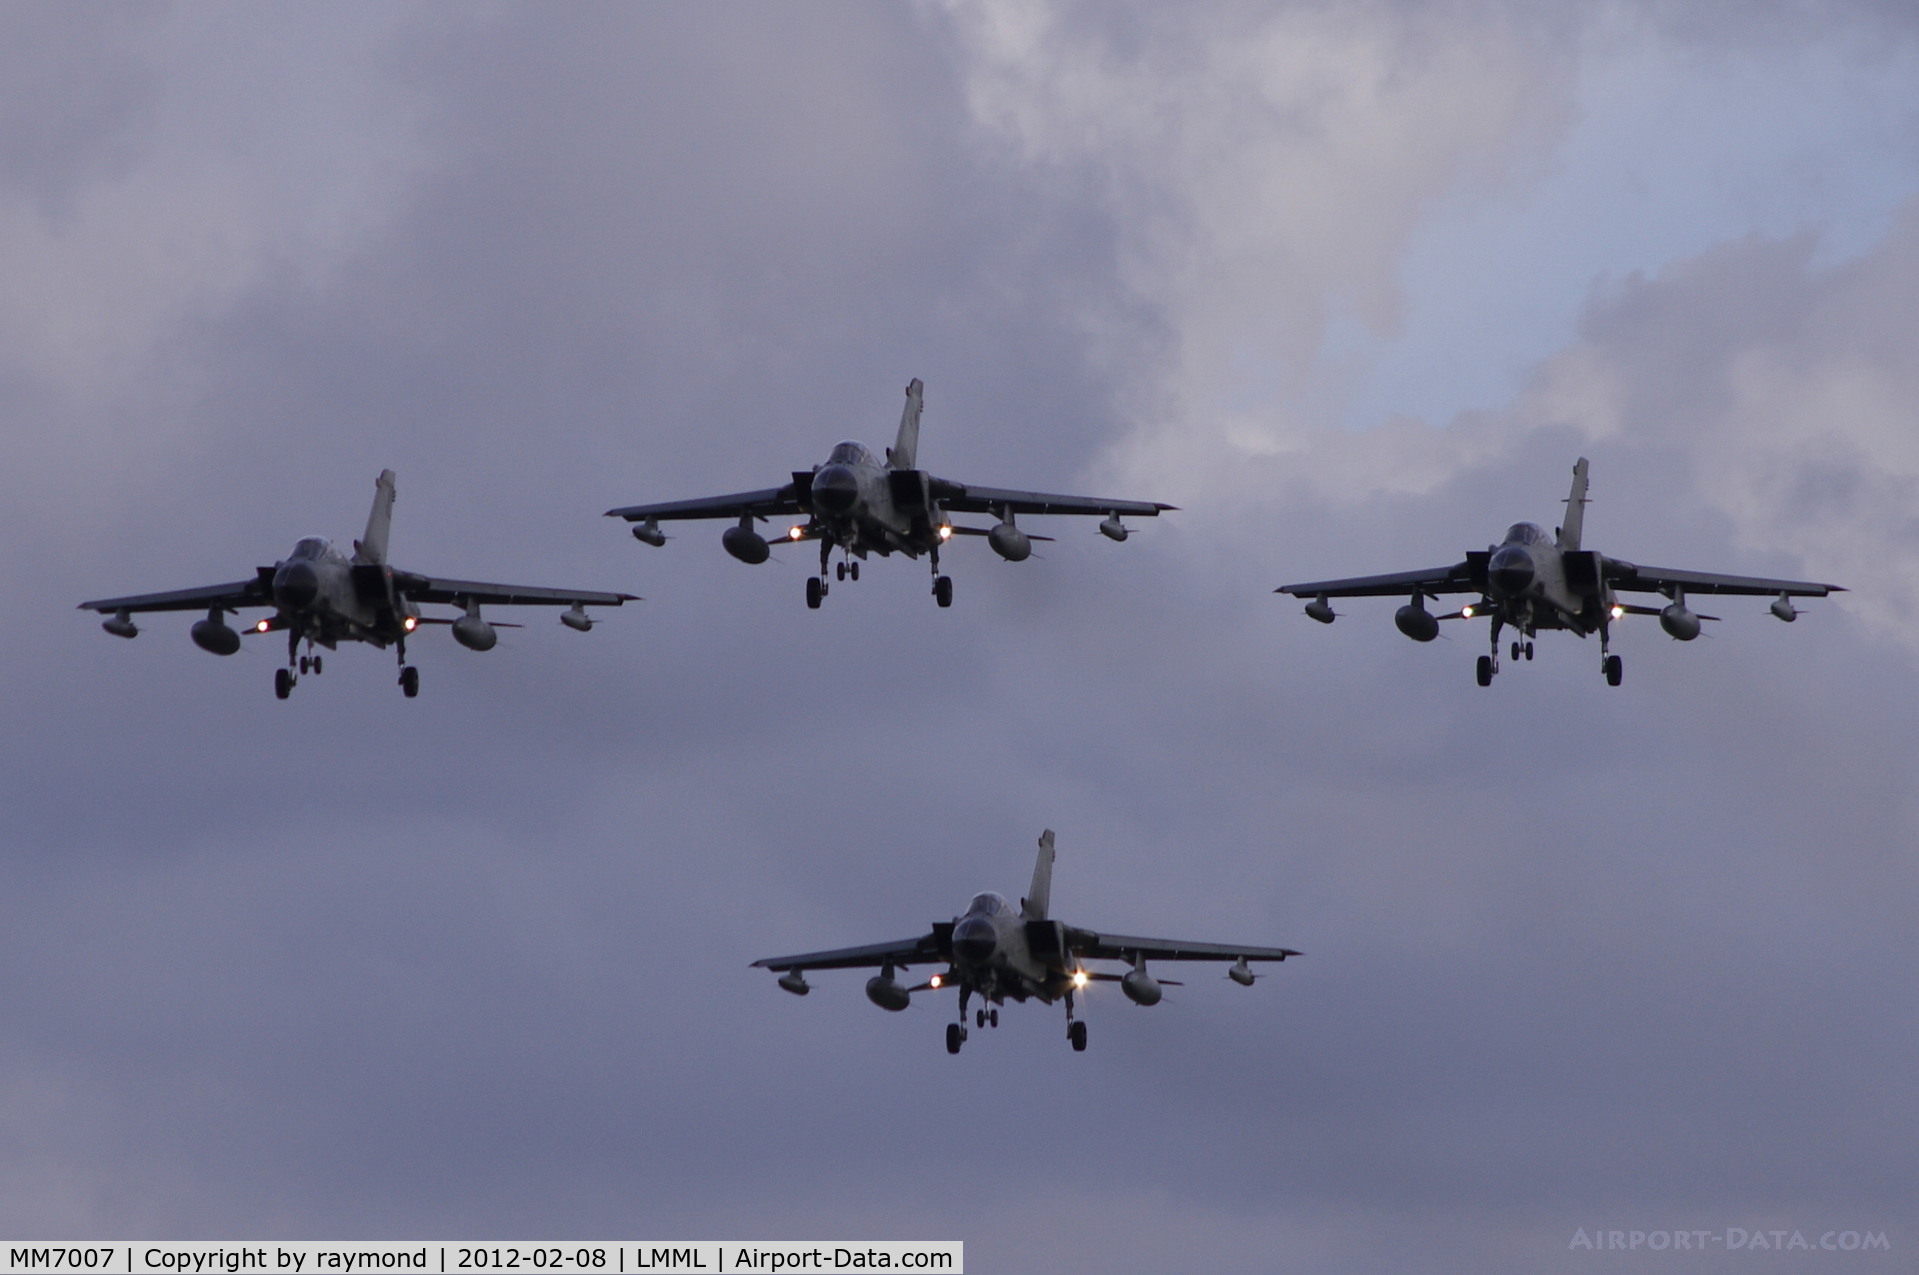 MM7007, Panavia Tornado IDS C/N 114/IS006/5010, Italian Air Force Tornadoes MM7007, MM7044, MM7071 & MM7083 approaching for an overshoot with full gear on Runway31 prior to landing.